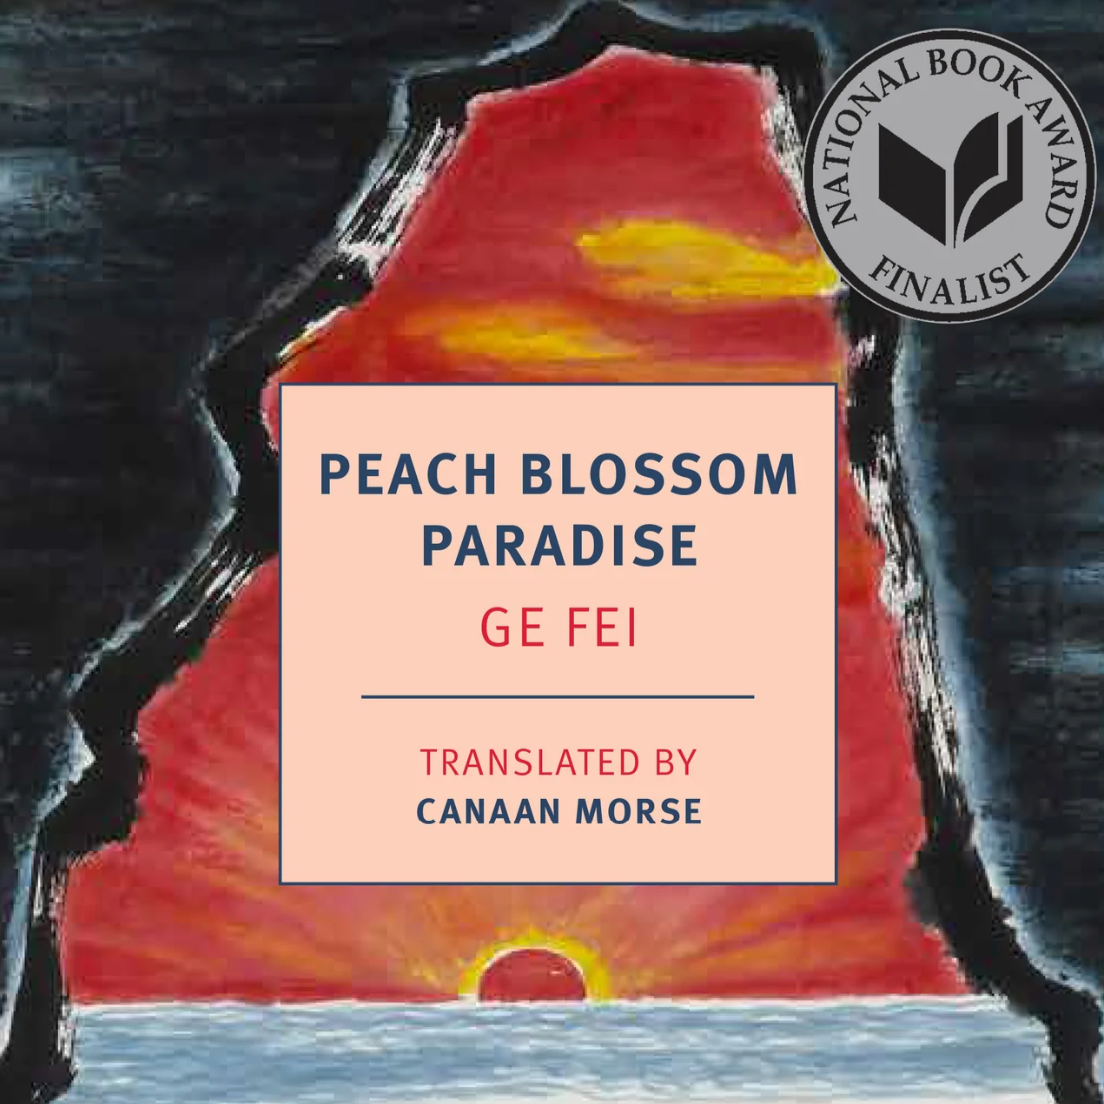 Peach Blossom Paradise with Canaan Morse